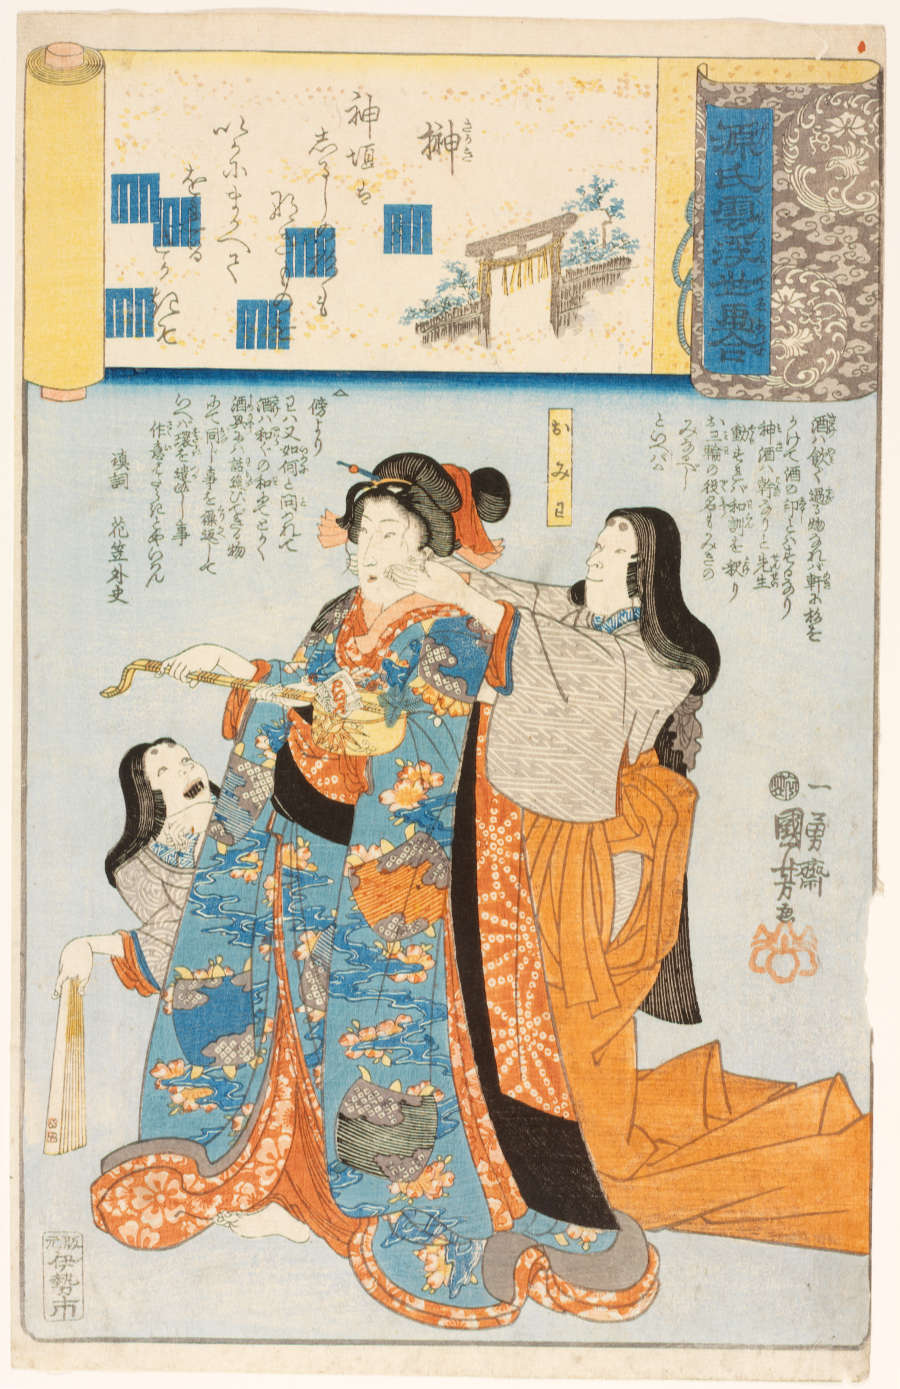 Traditional woodblock print of three women in colorful kimonos. The figure in the center is dressed in grand attire, the two other women to her sides assisting in grooming practices. 